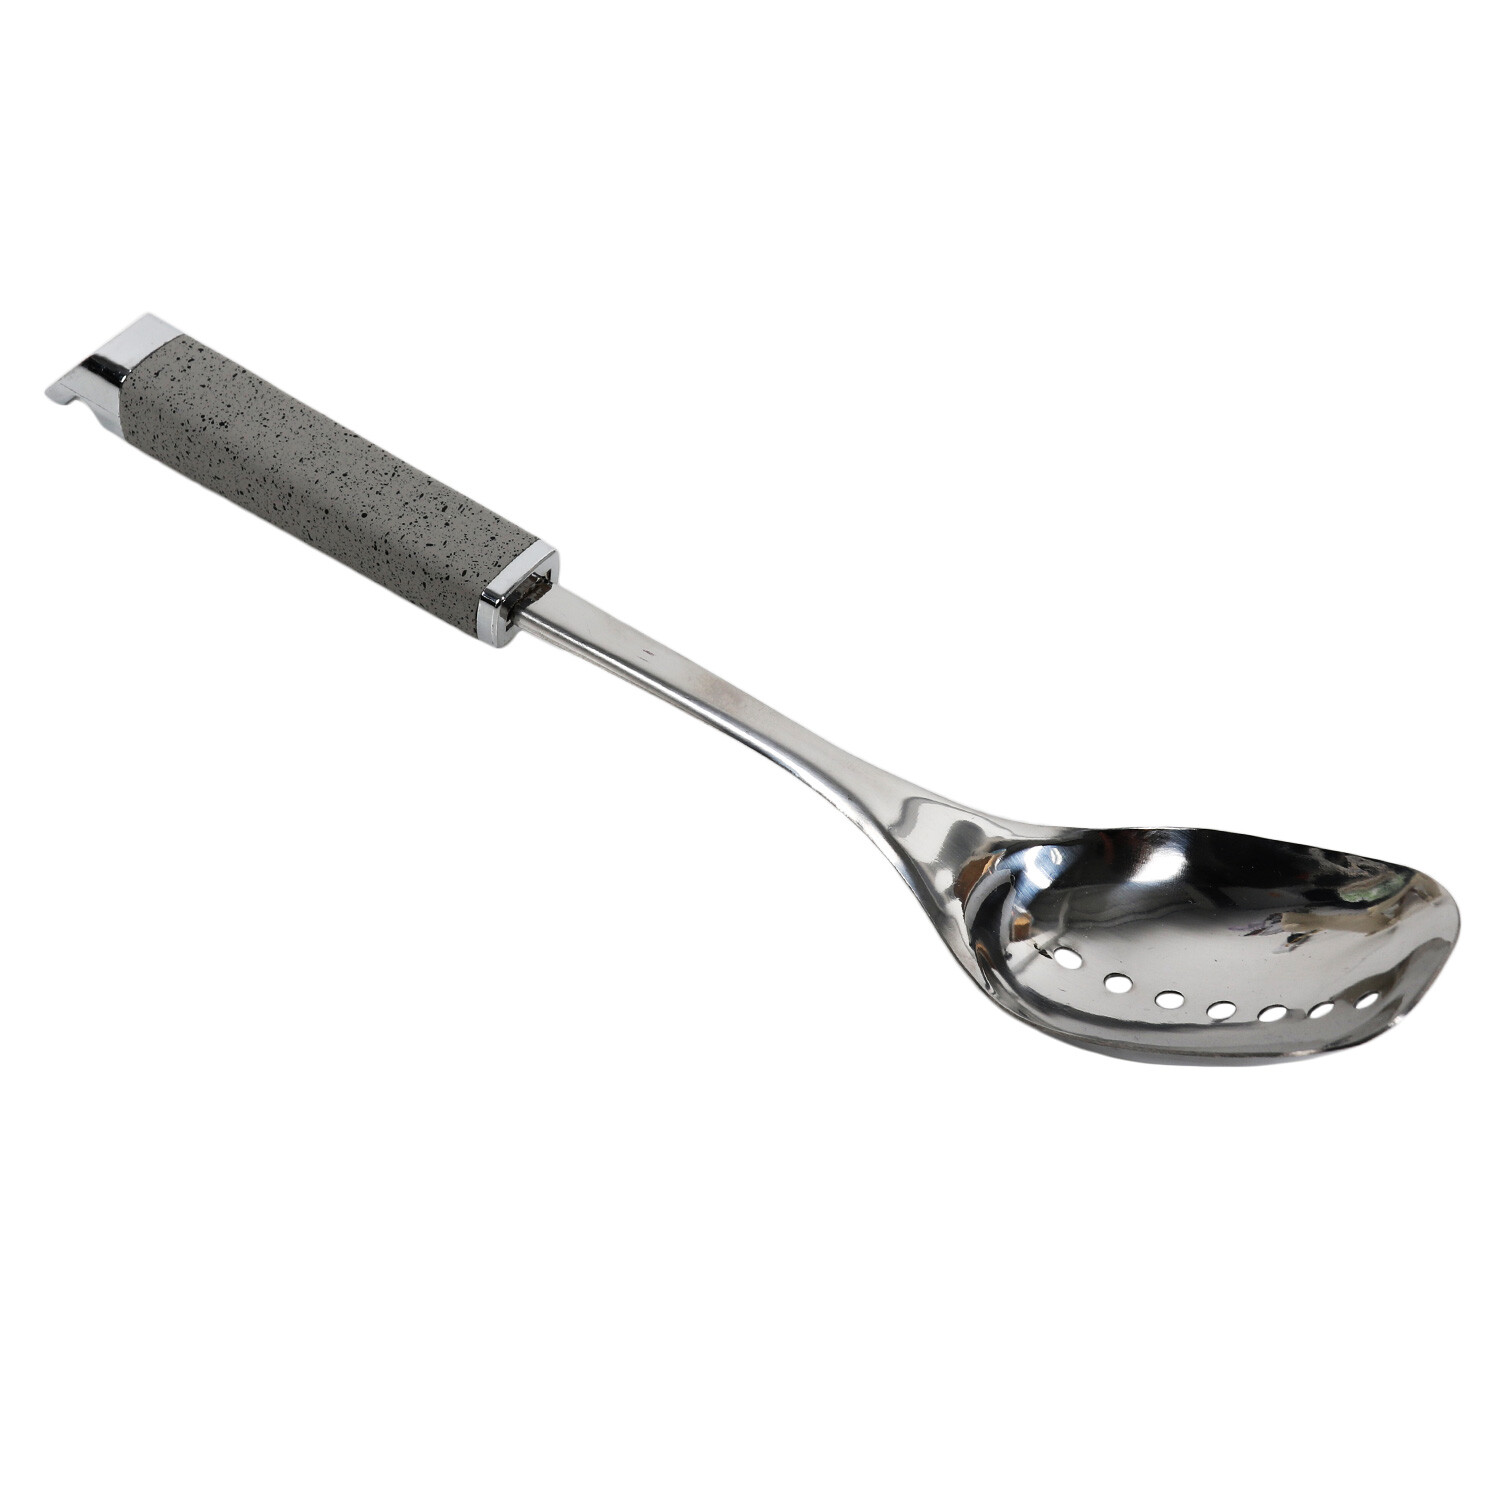 Stainless Steel Slotted Spoon with Soft Touch Handle - Grey Image 1